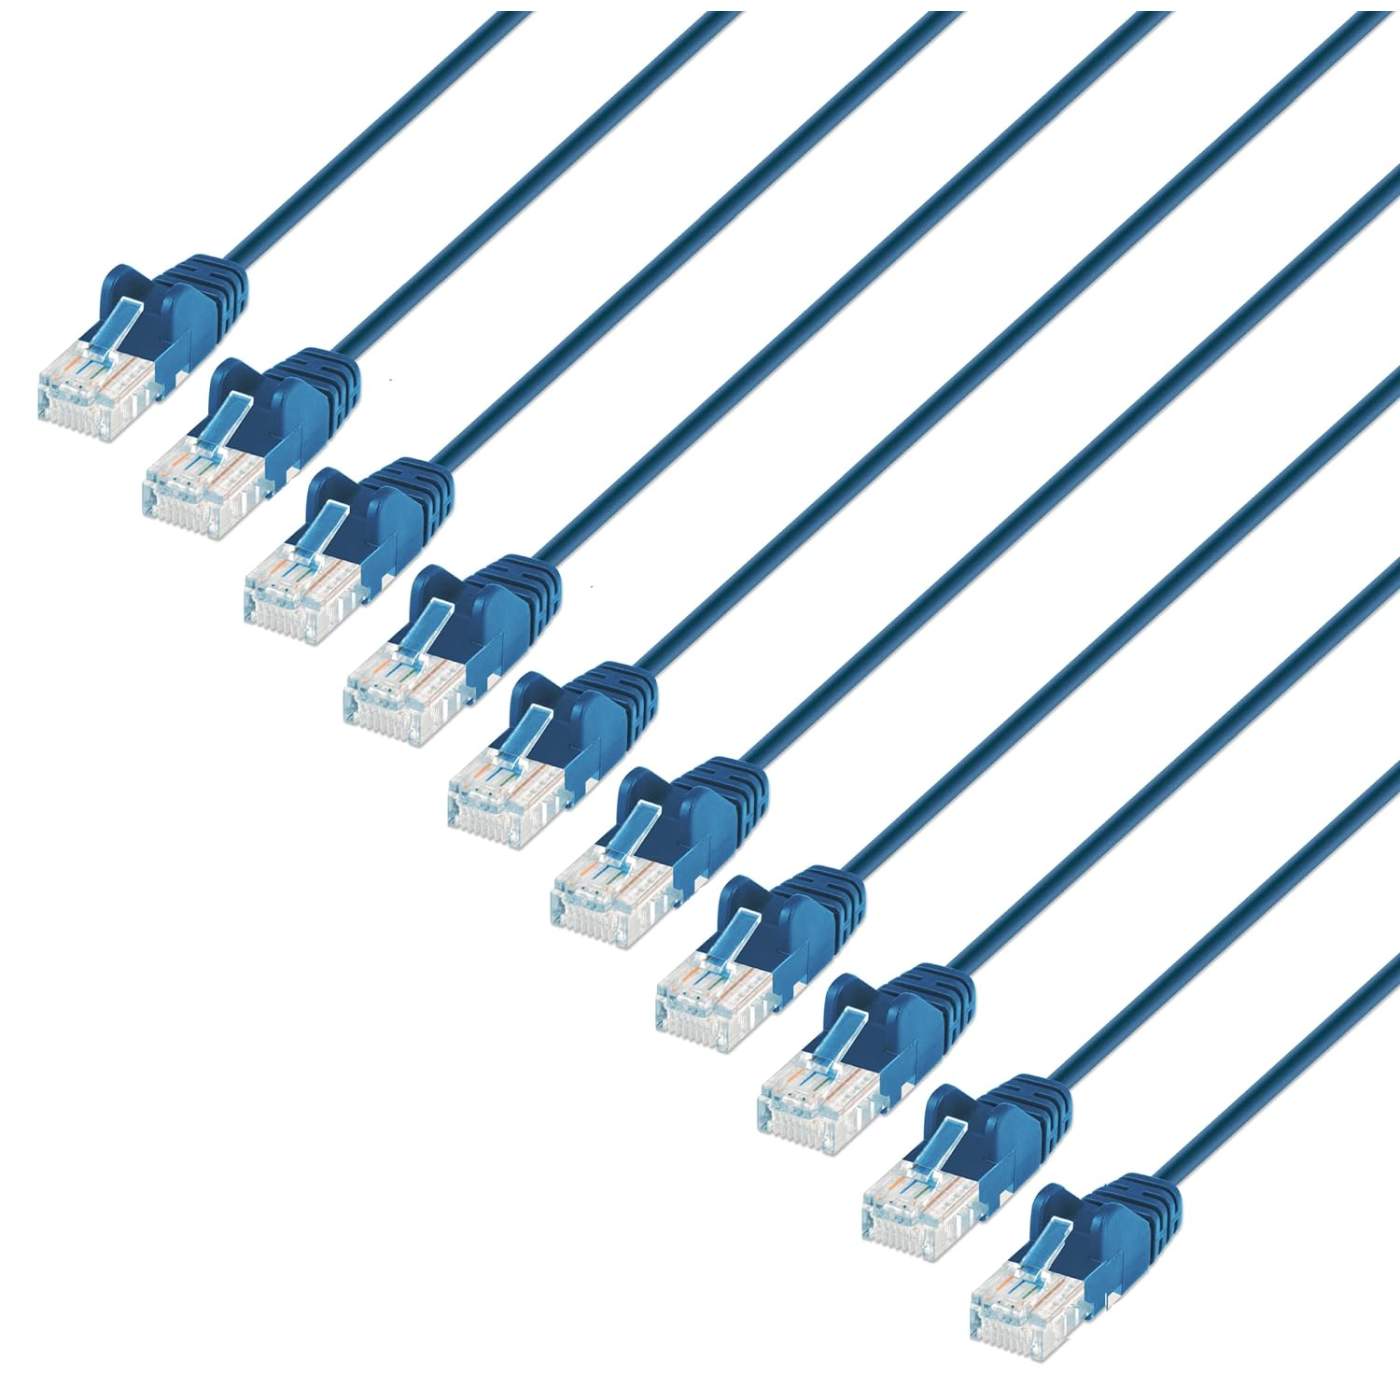 1 FT Booted CAT6 Network Patch Cable - Blue